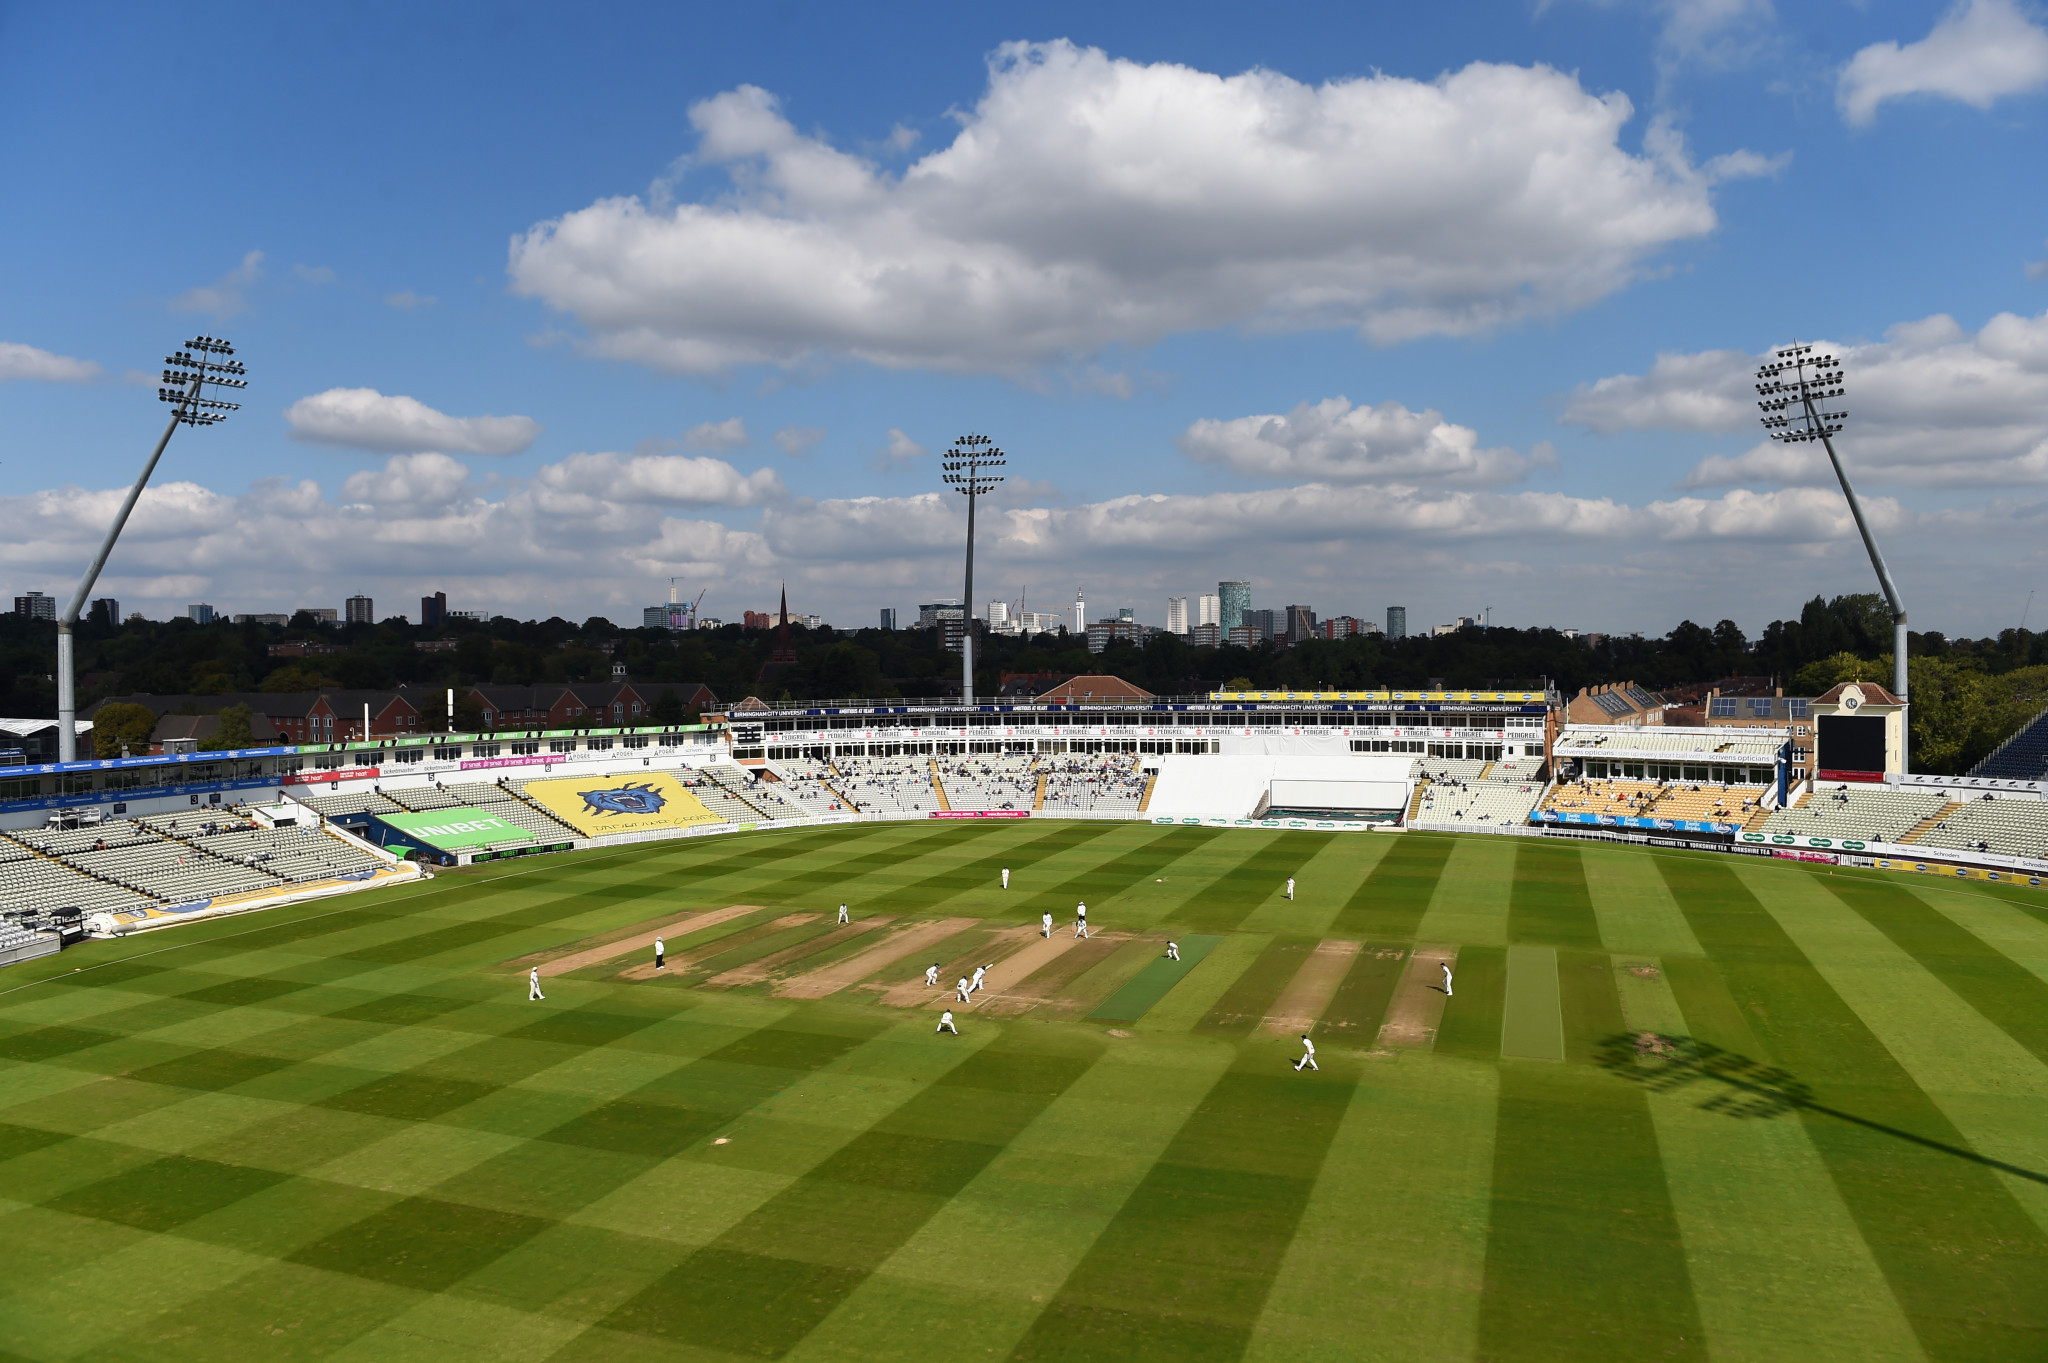 Winvic earns contract to transform Edgbaston in time for Birmingham 2022